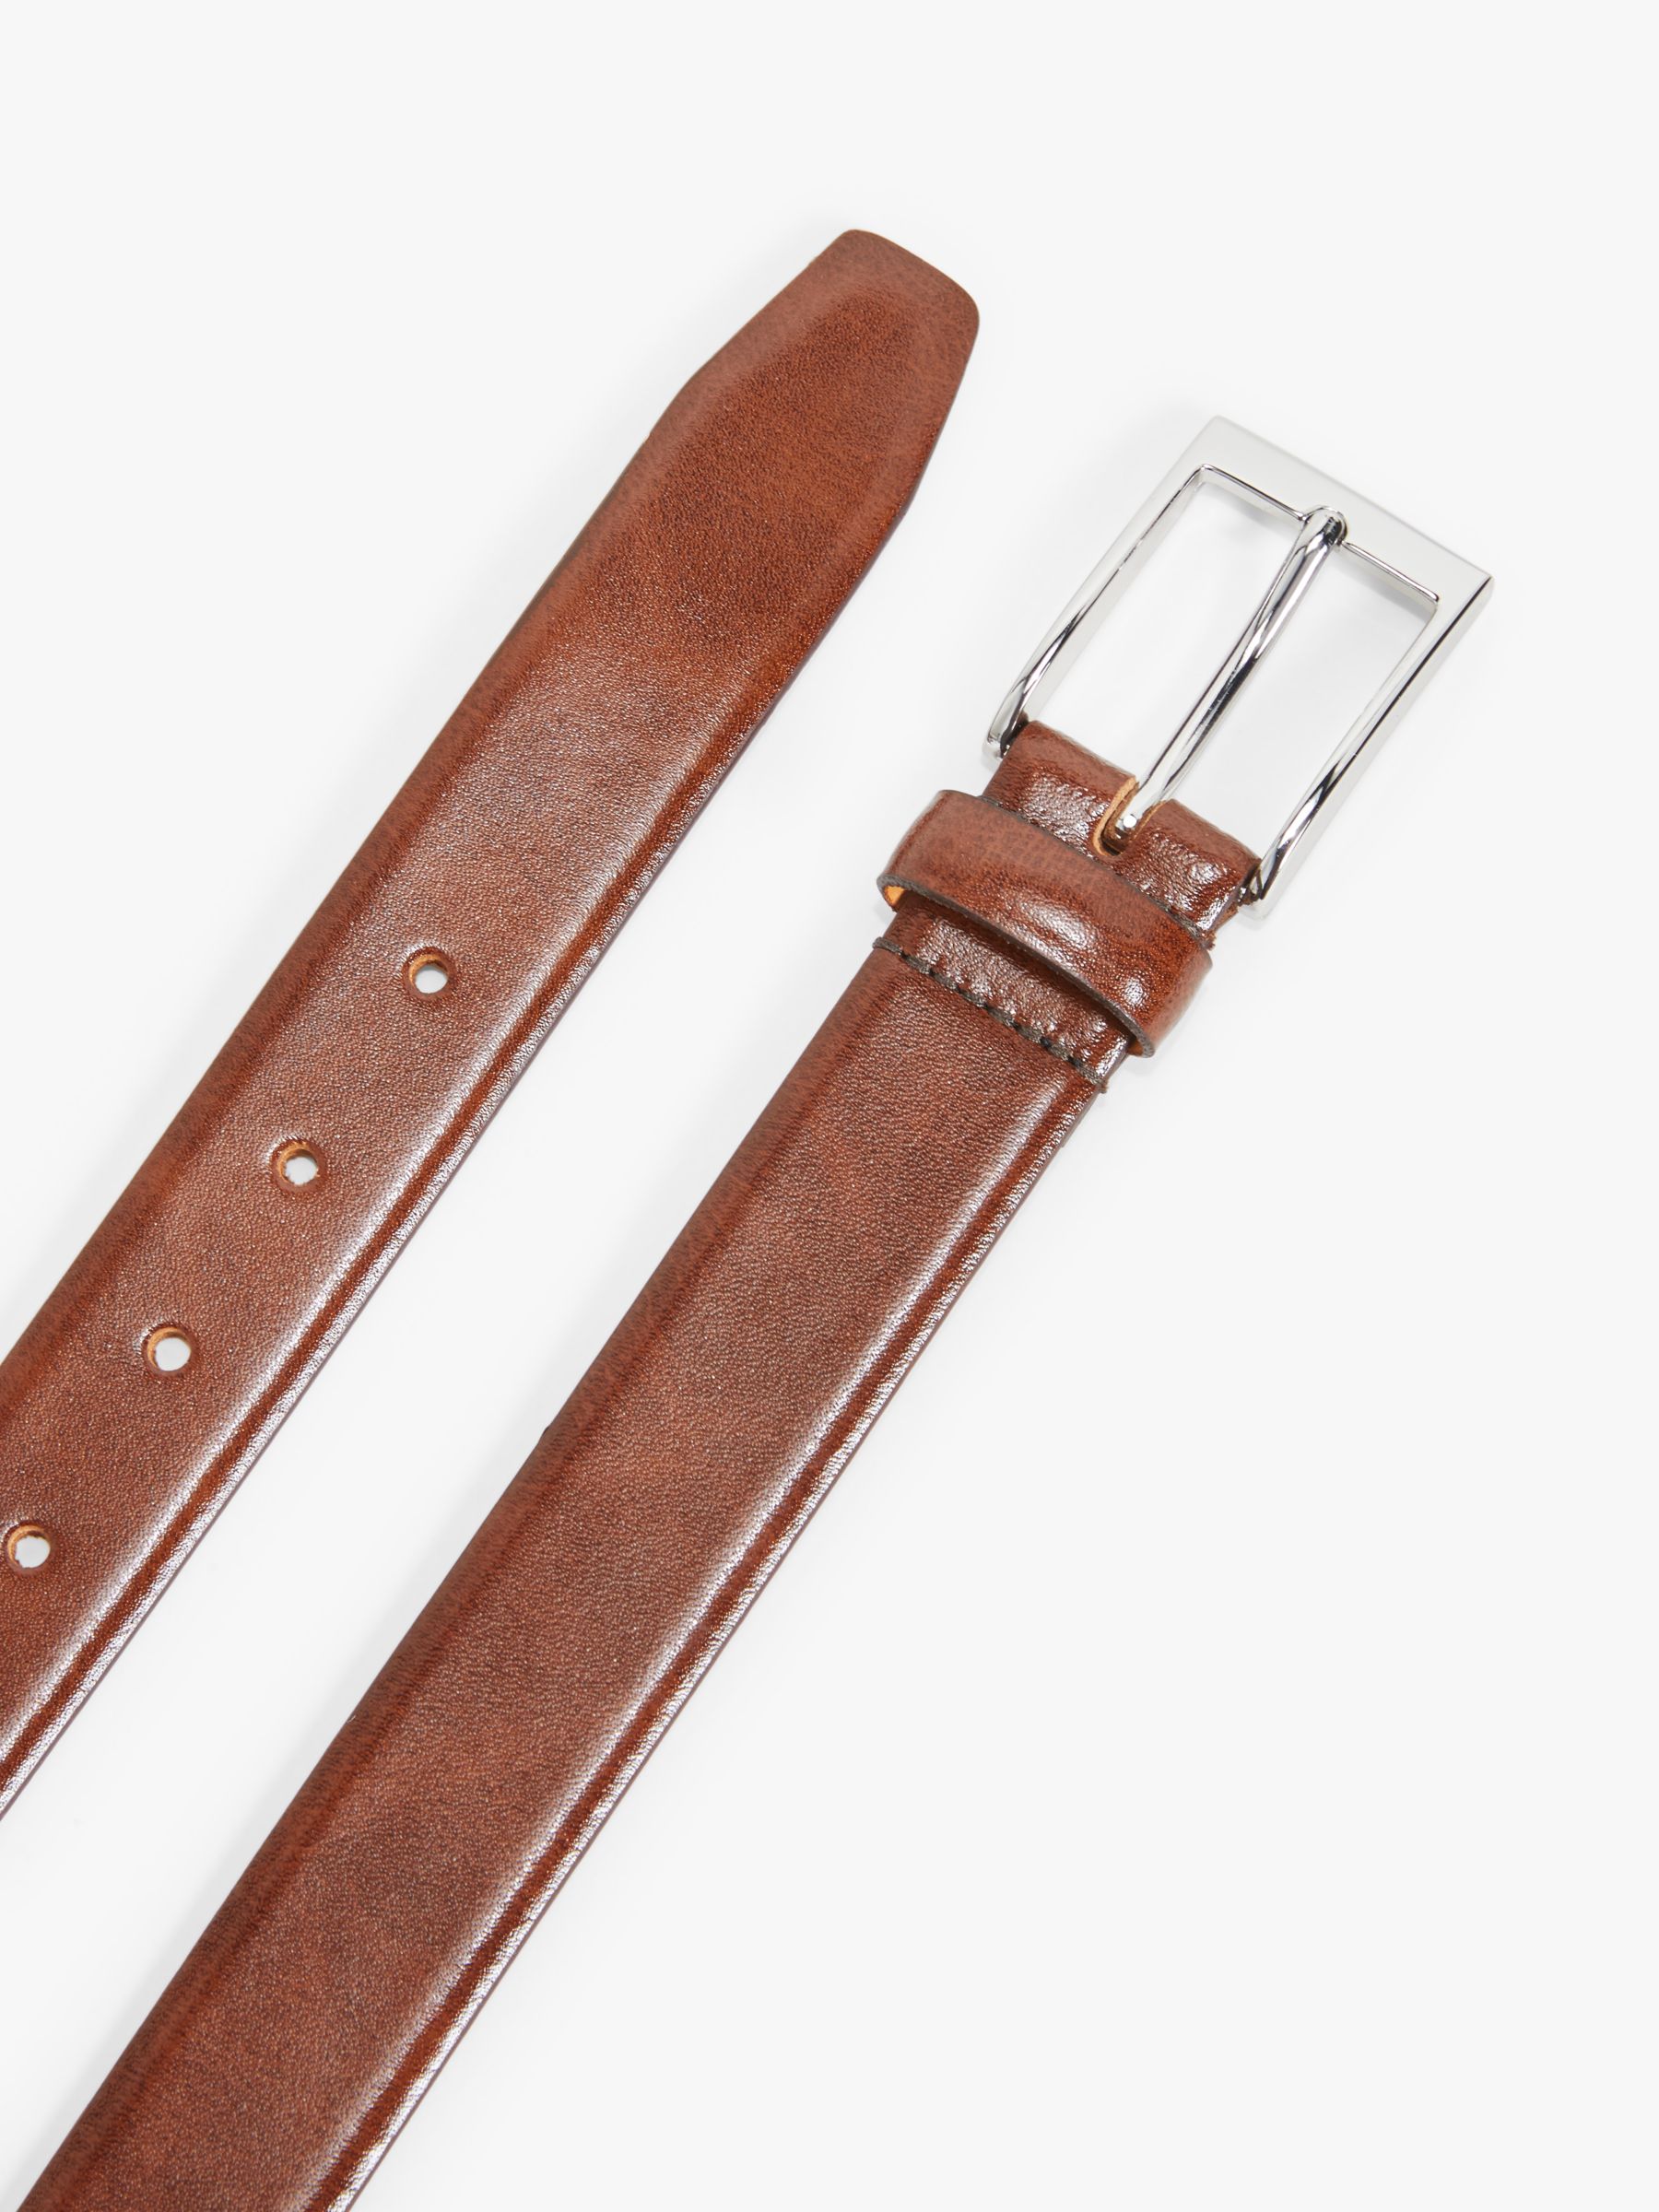 John Lewis Made in England 30mm Formal Leather Belt, Tan, S